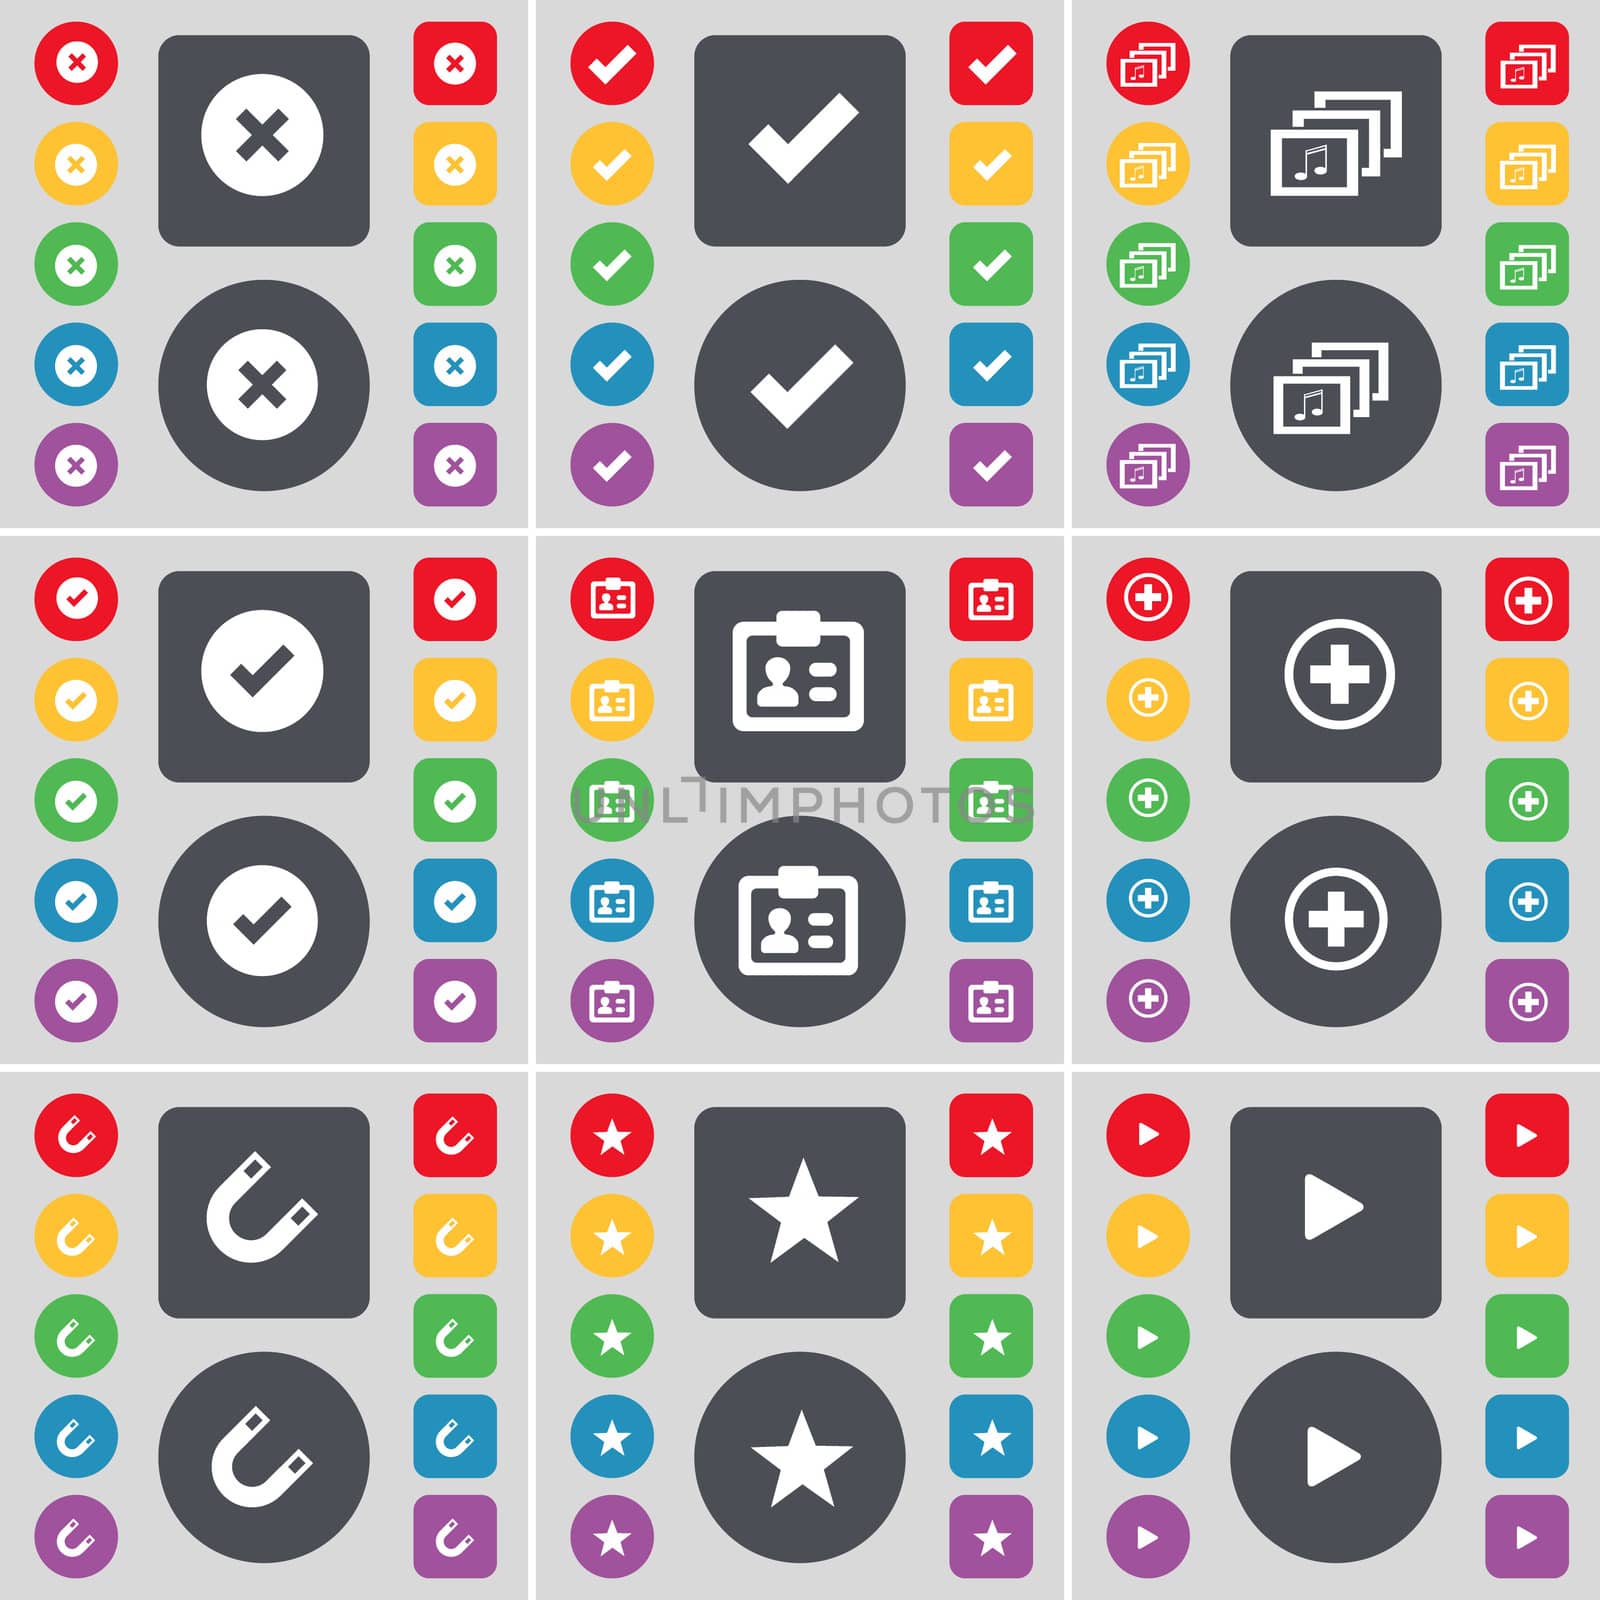 Stop, Tick, Gallery, Tick, Contact, Plus, Magnet, Star, Media play icon symbol. A large set of flat, colored buttons for your design.  by serhii_lohvyniuk